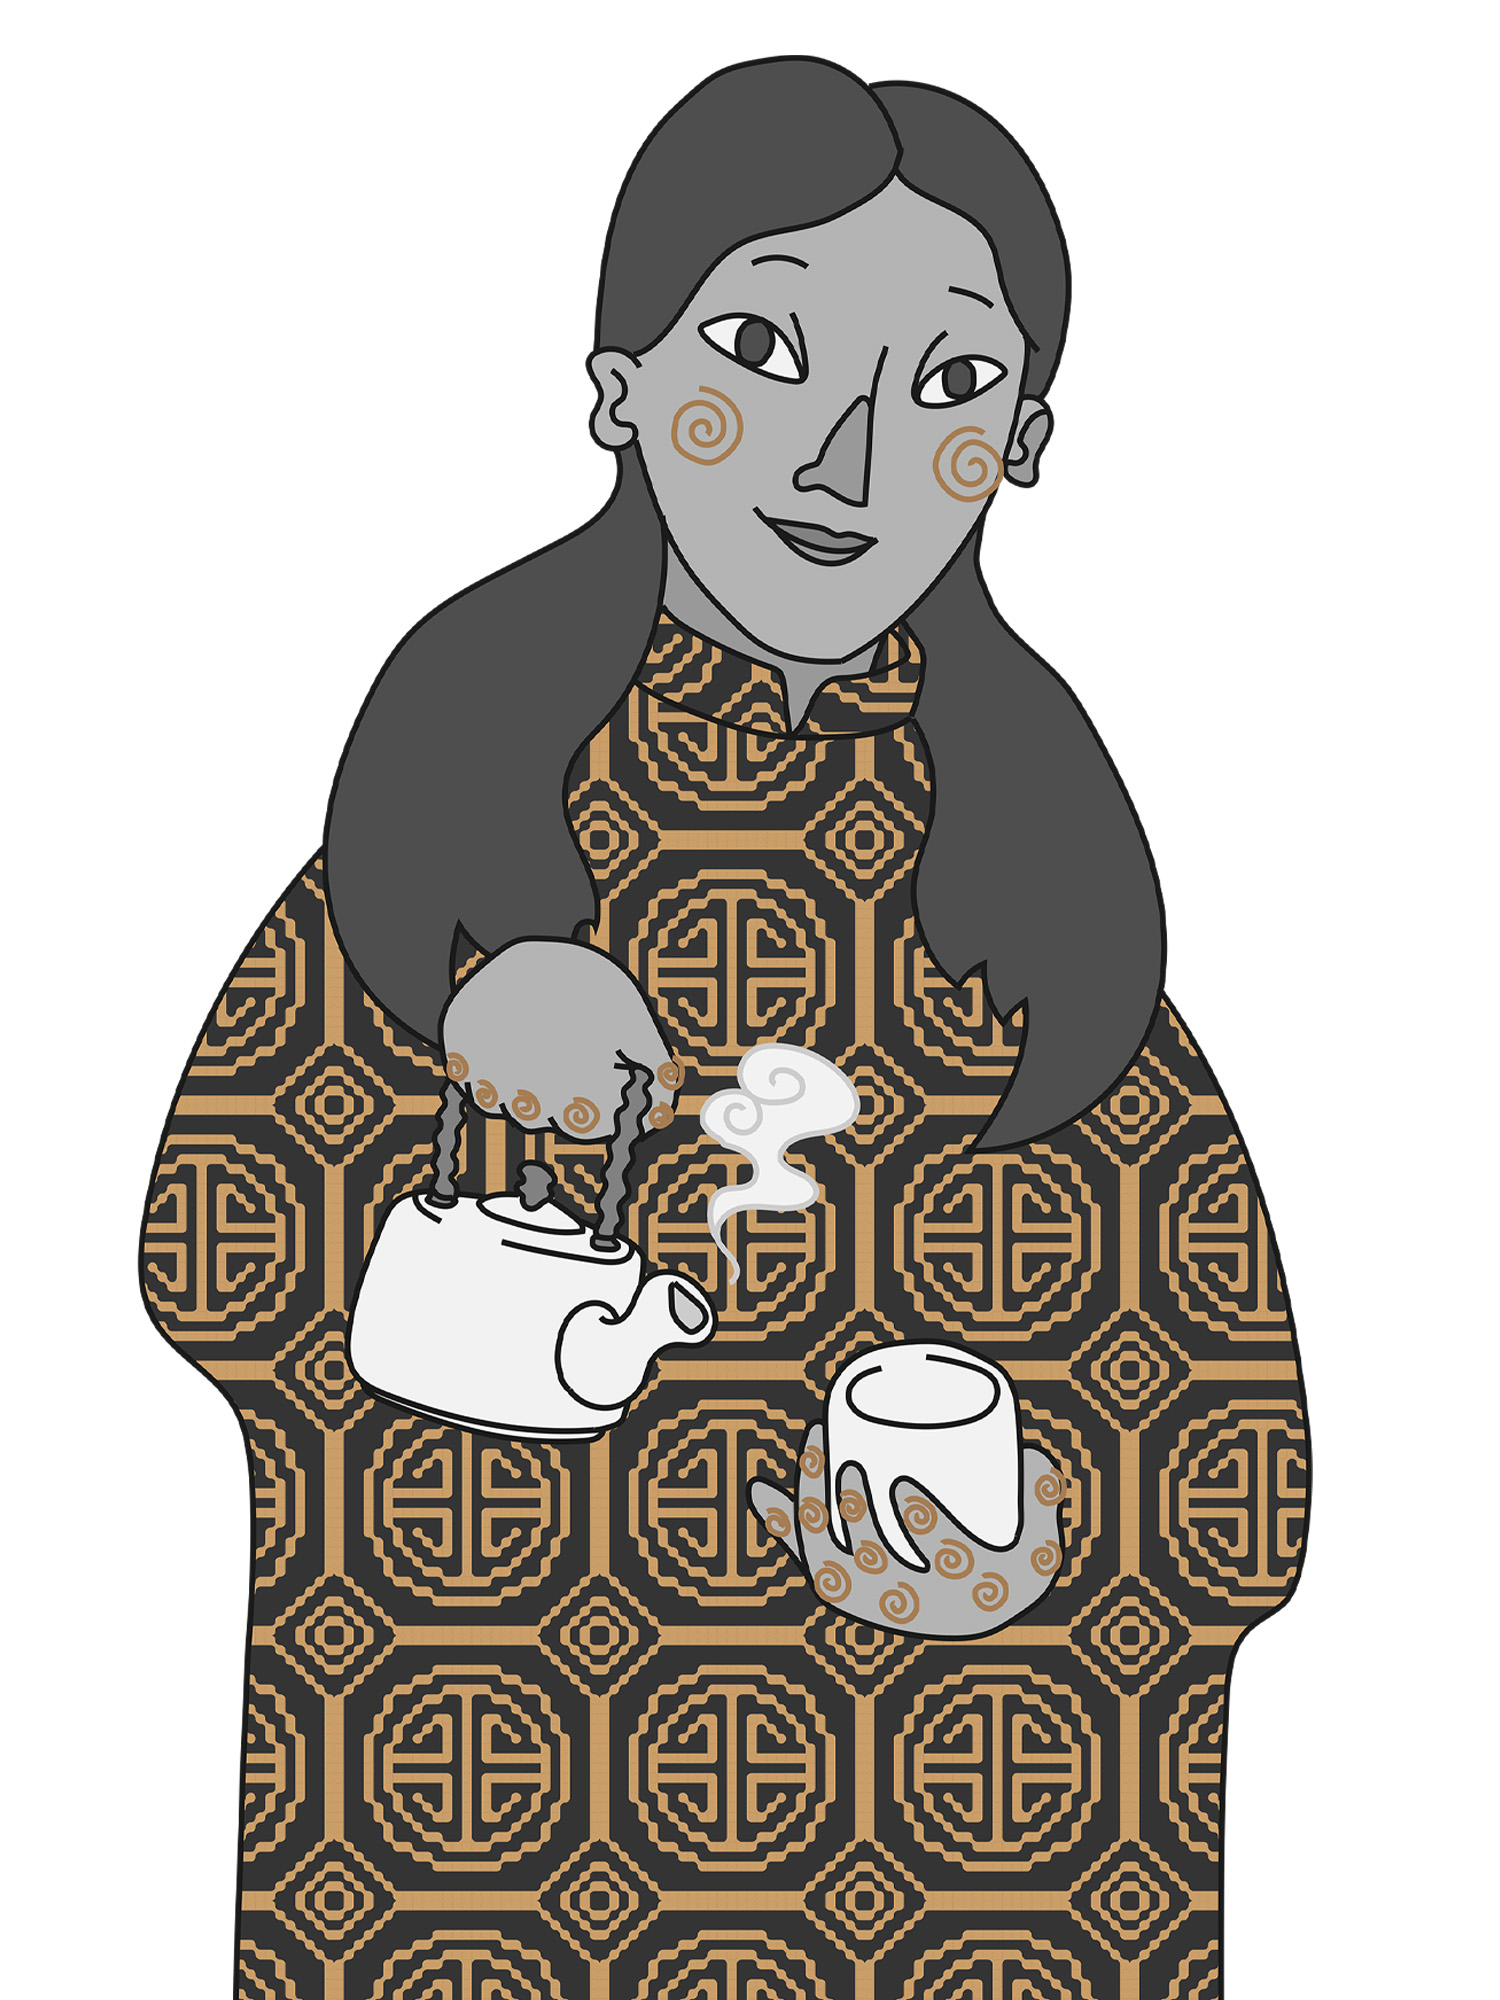 Illustrated Chinese woman with patterned clothes on and cup of tea in her hand